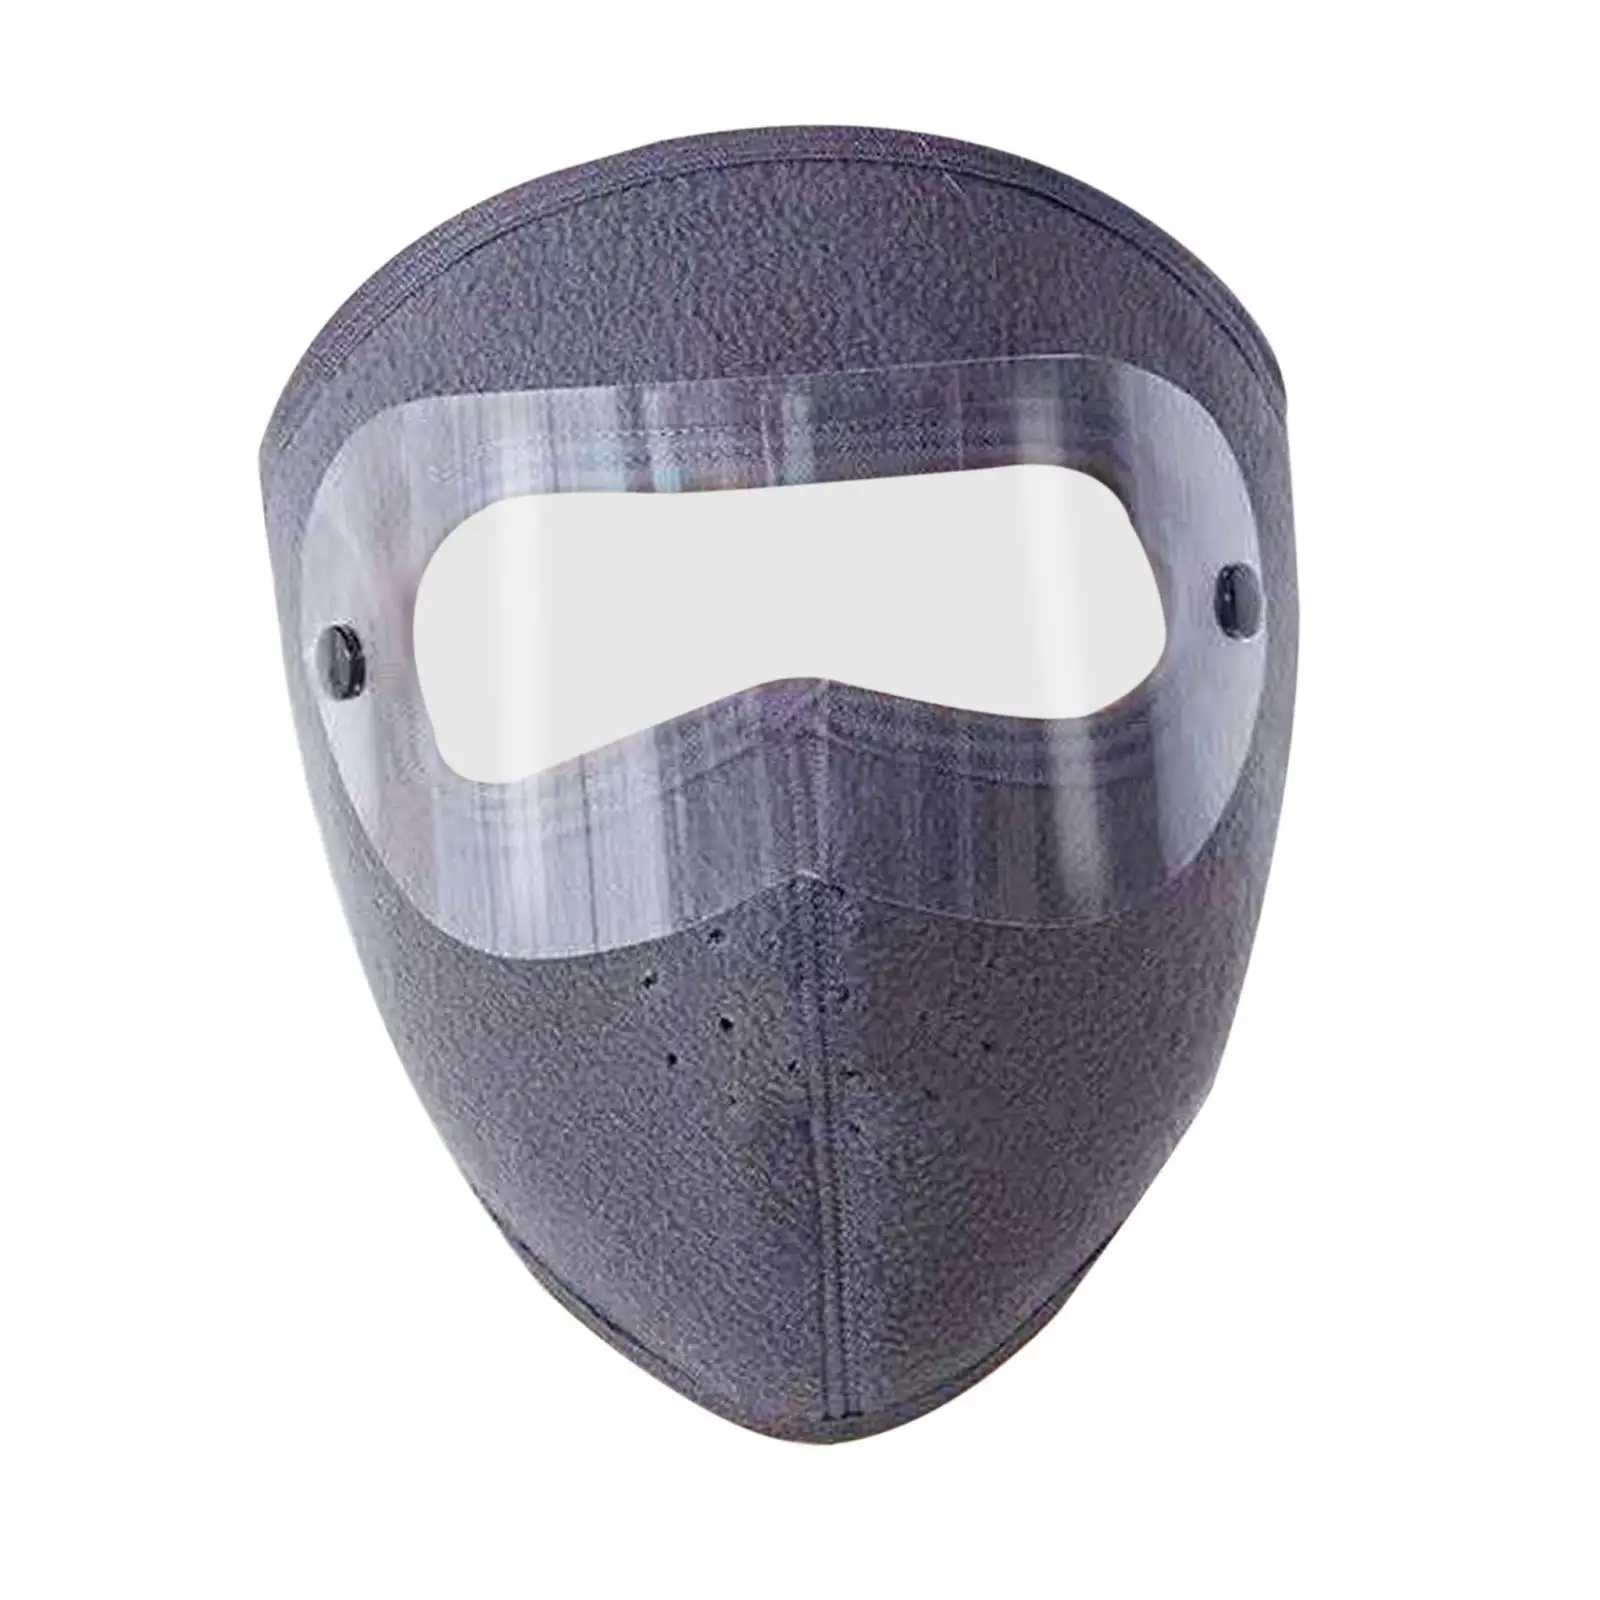 Winter Mask Thermal Breathable Reusable Full Face Mask Cold Weather Face Mask for Running Climbing Motorcycling Camping Hiking